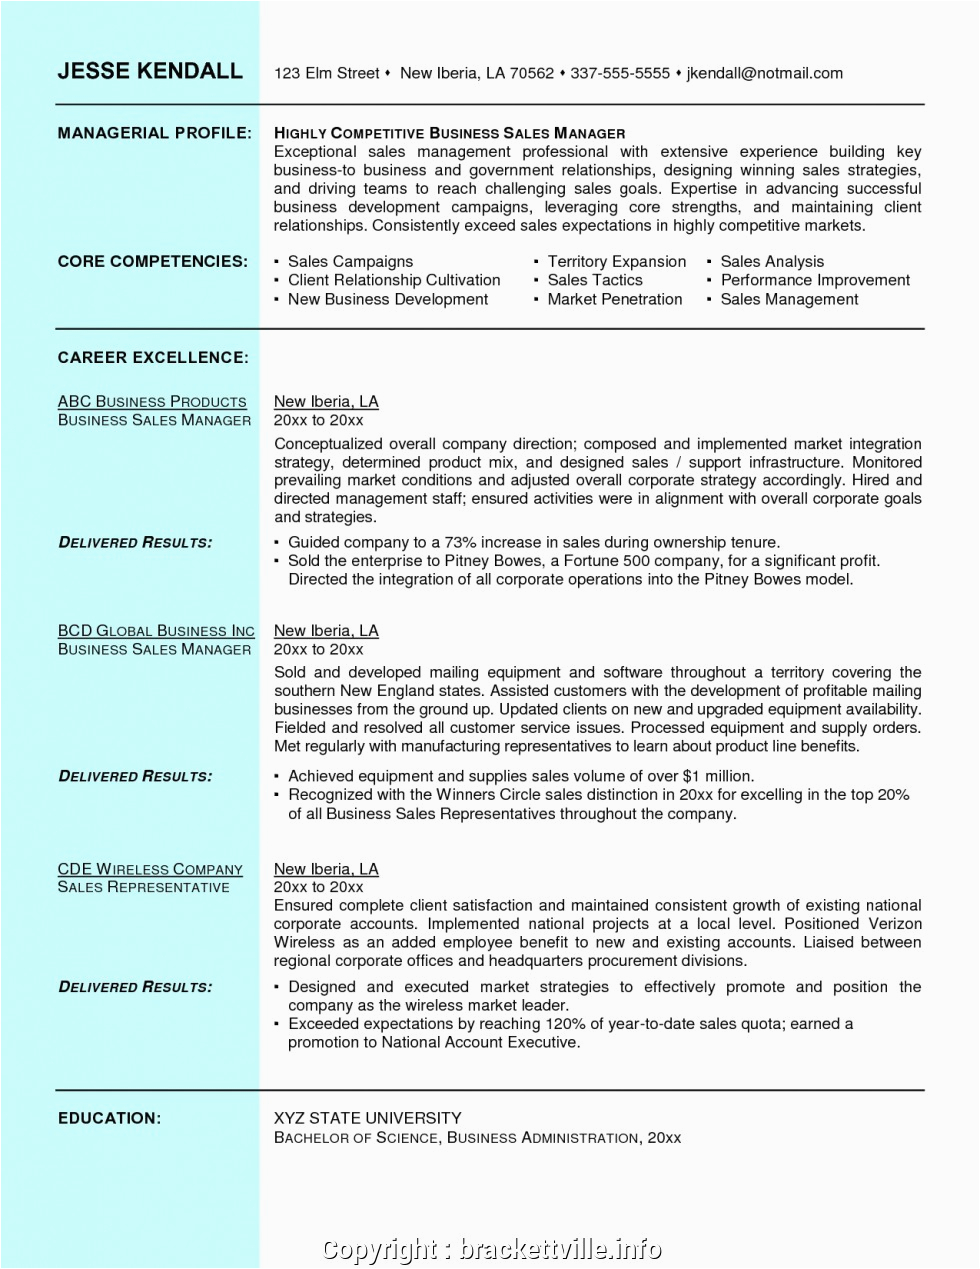 Sample Resume Objective for Sales Position Simple Best Sales Manager Resume Objective Resume format